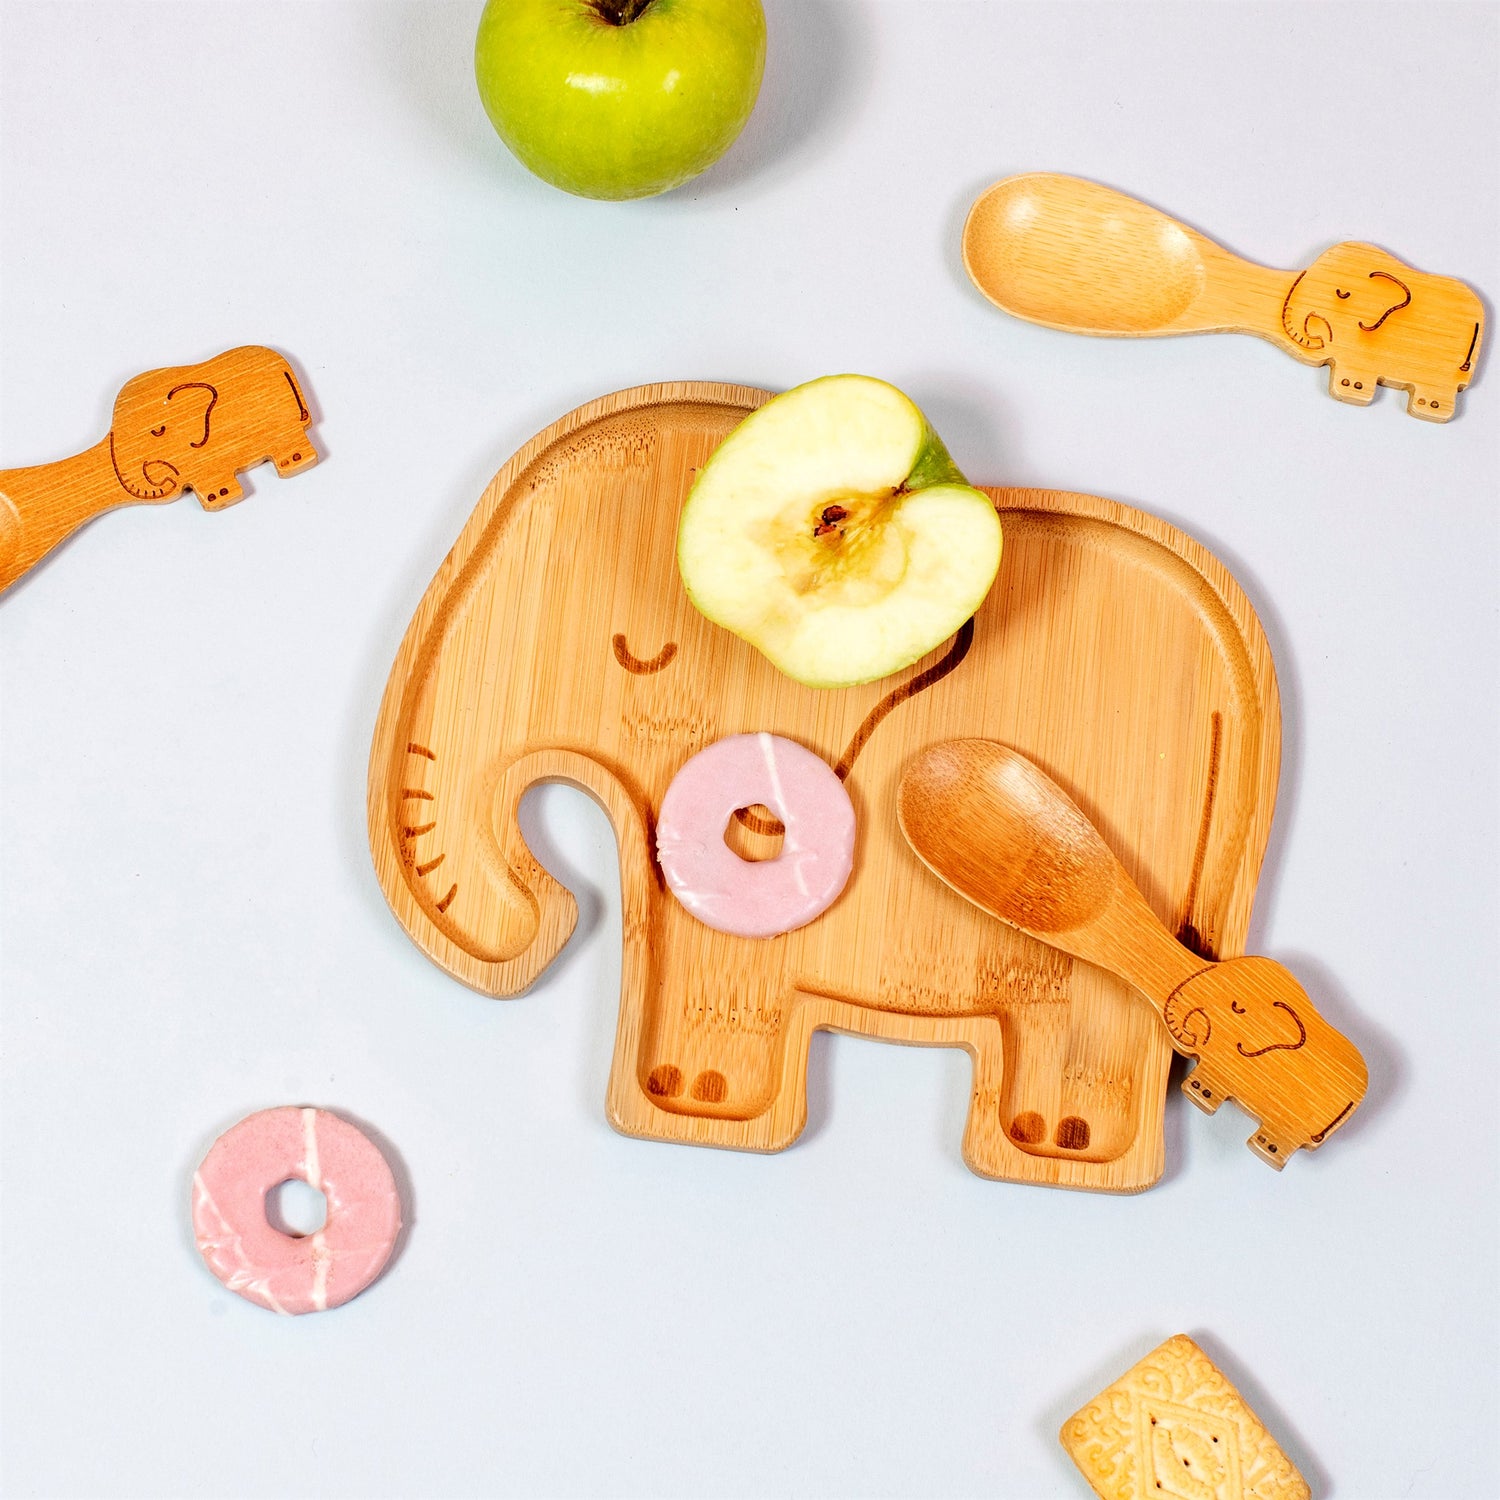 A planet-friendly everyday reusable, this gorgeous bamboo plate features a lovely elephant design.